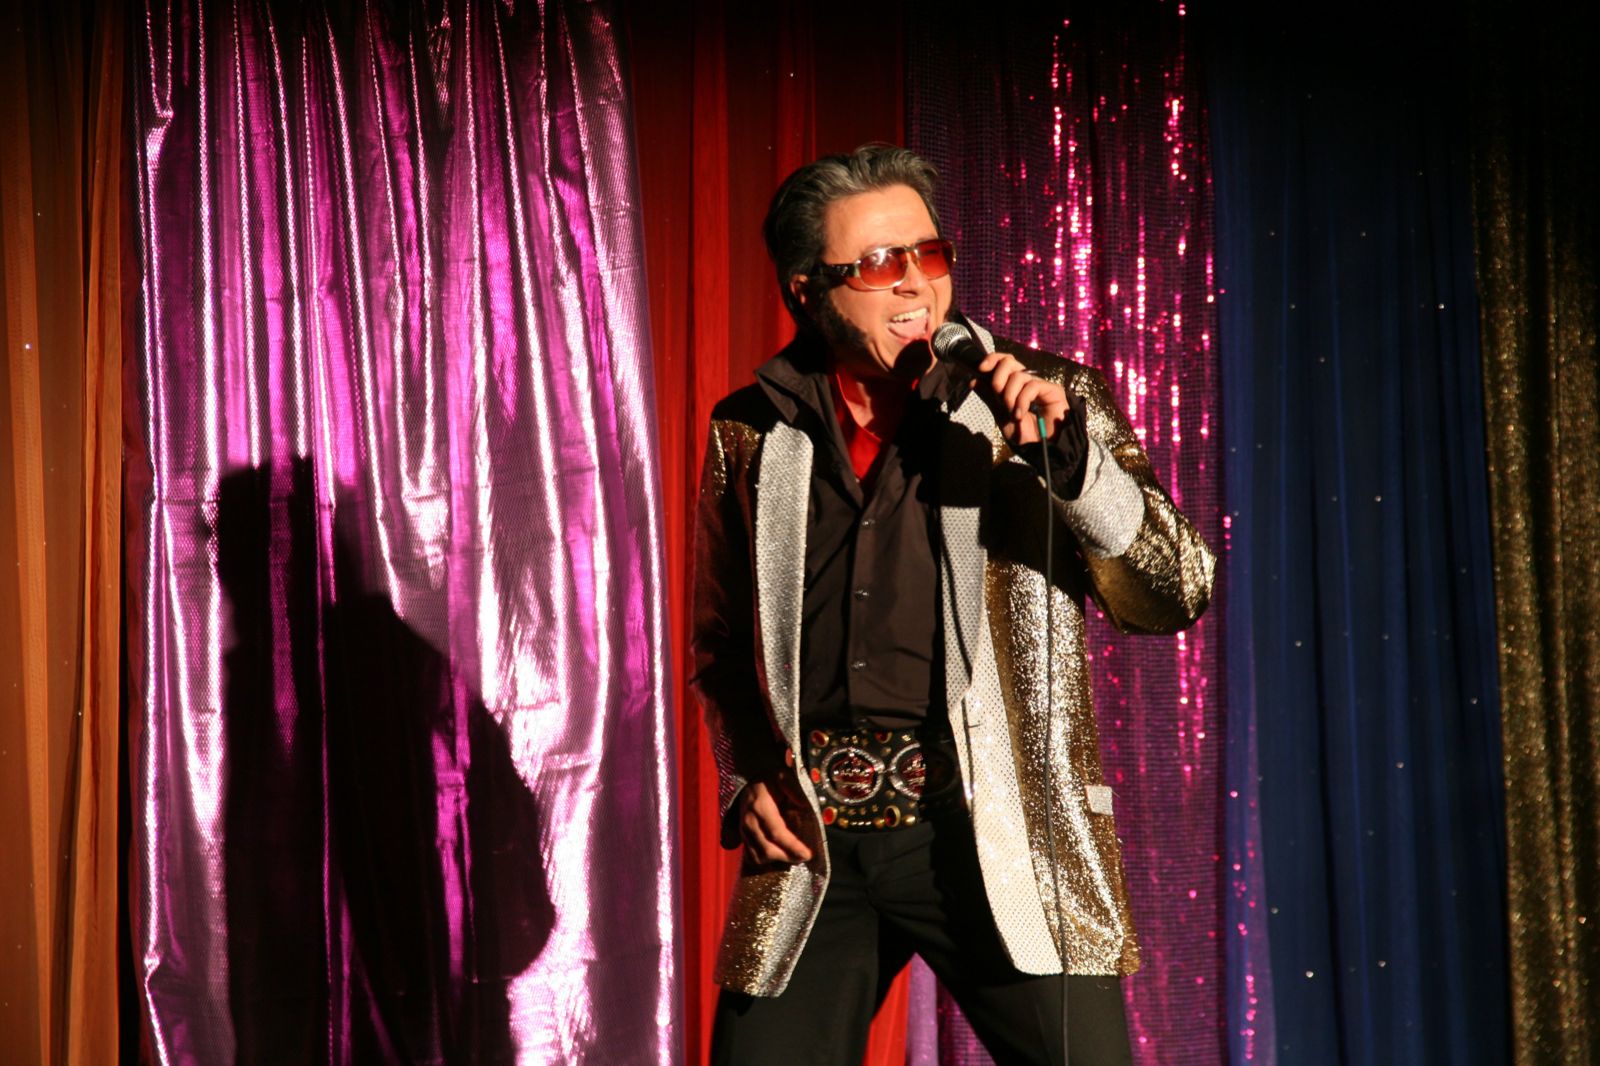 ChineseElvis in action at Lantern Arts